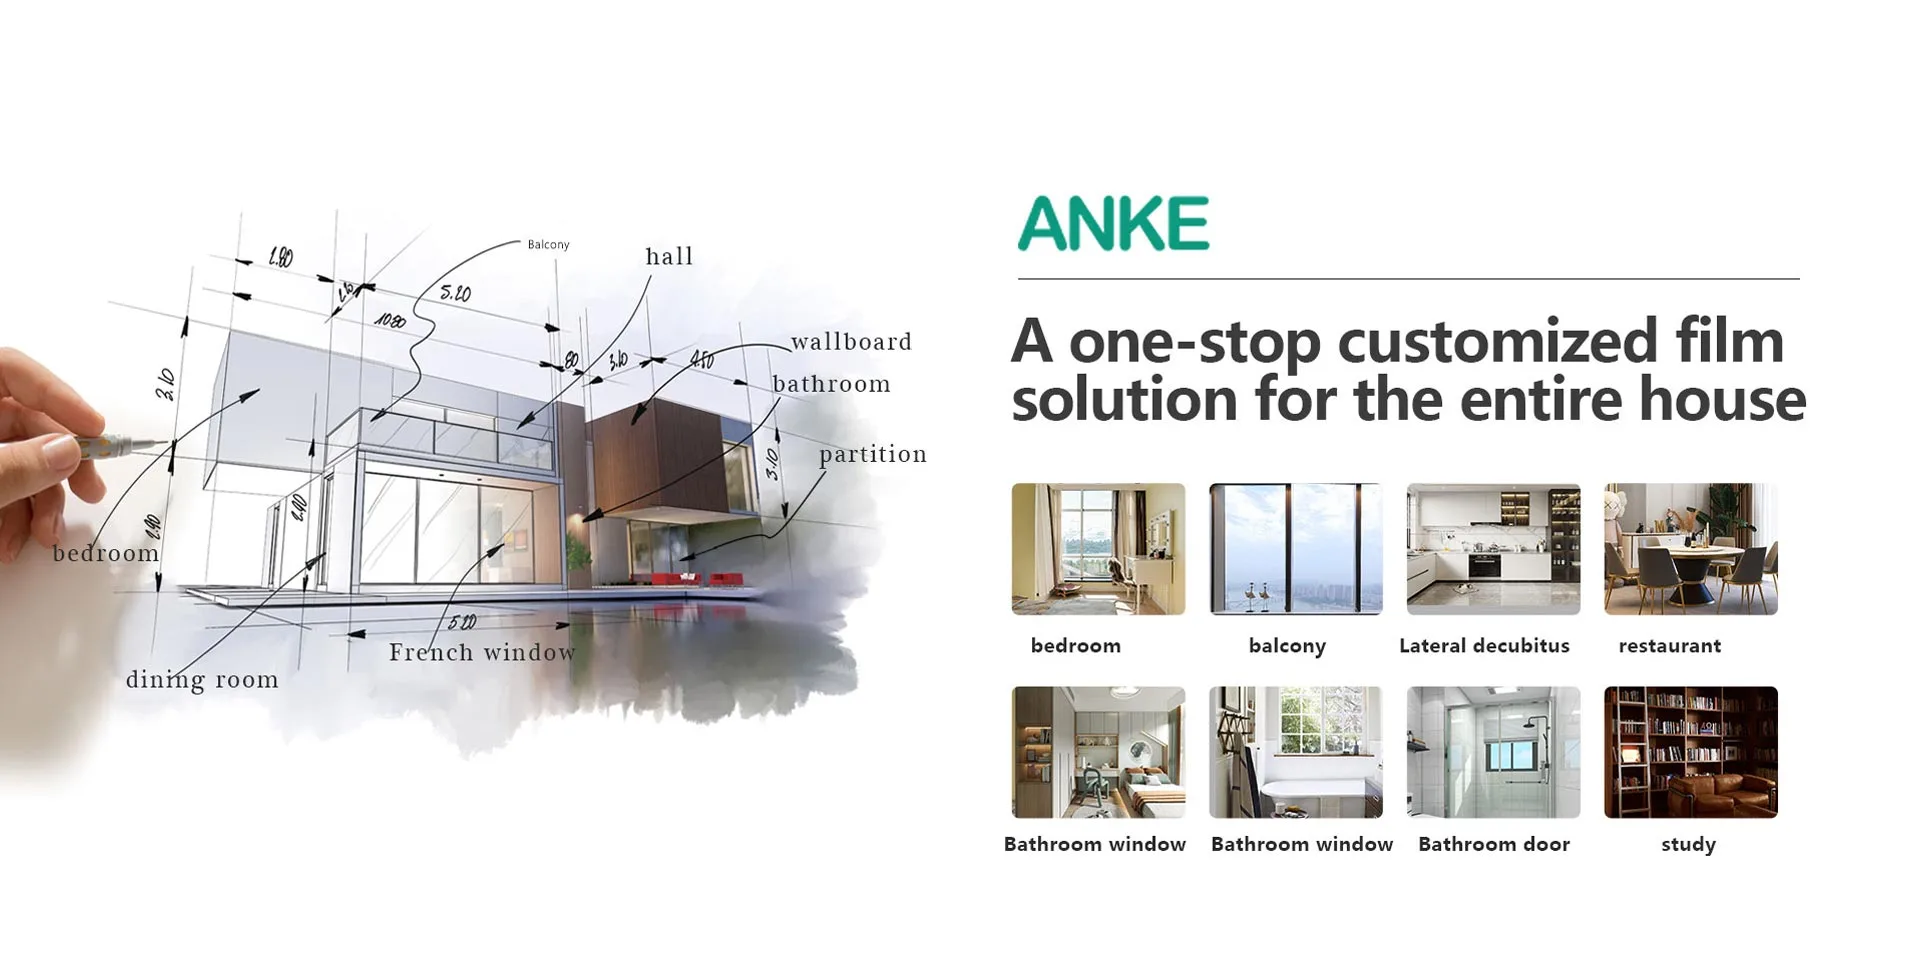 ANKE A one-stop customized decorative film solution for the entire house